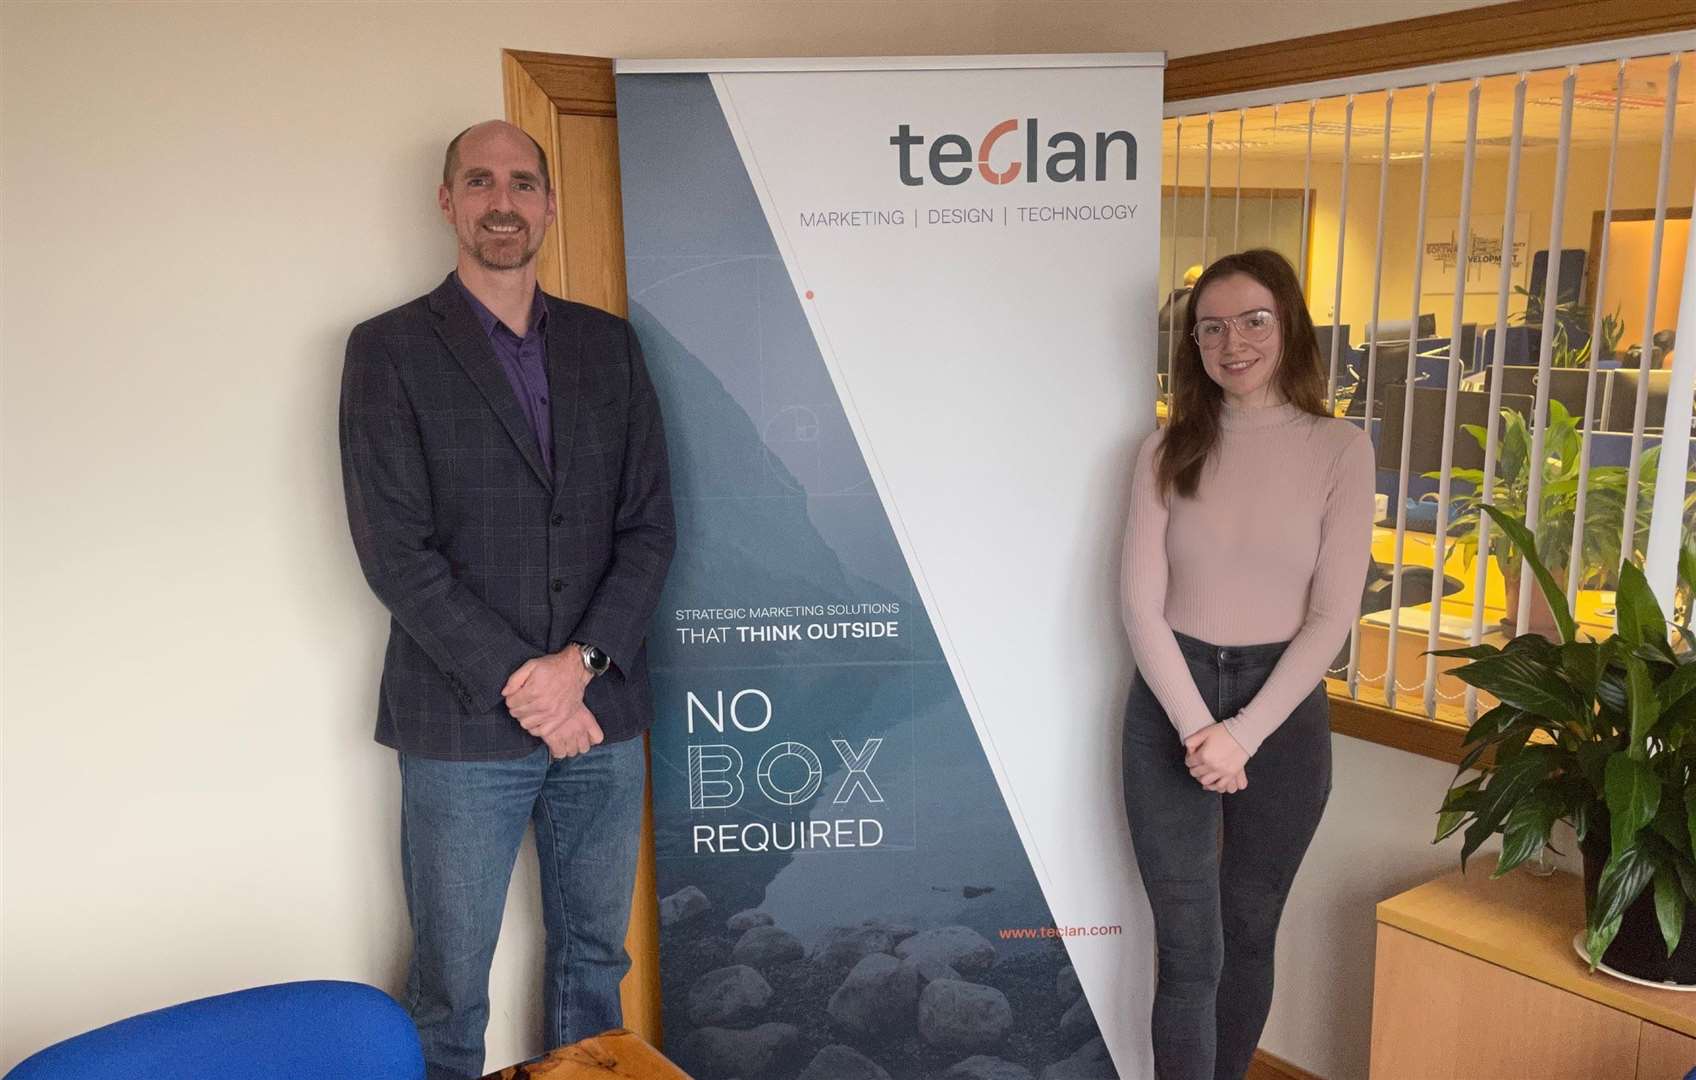 Teclan Managing Director Fergus Weir and Caitlin Maclean, who nominated the company in the Employee Choice category at the Living Wage Scotland Awards.